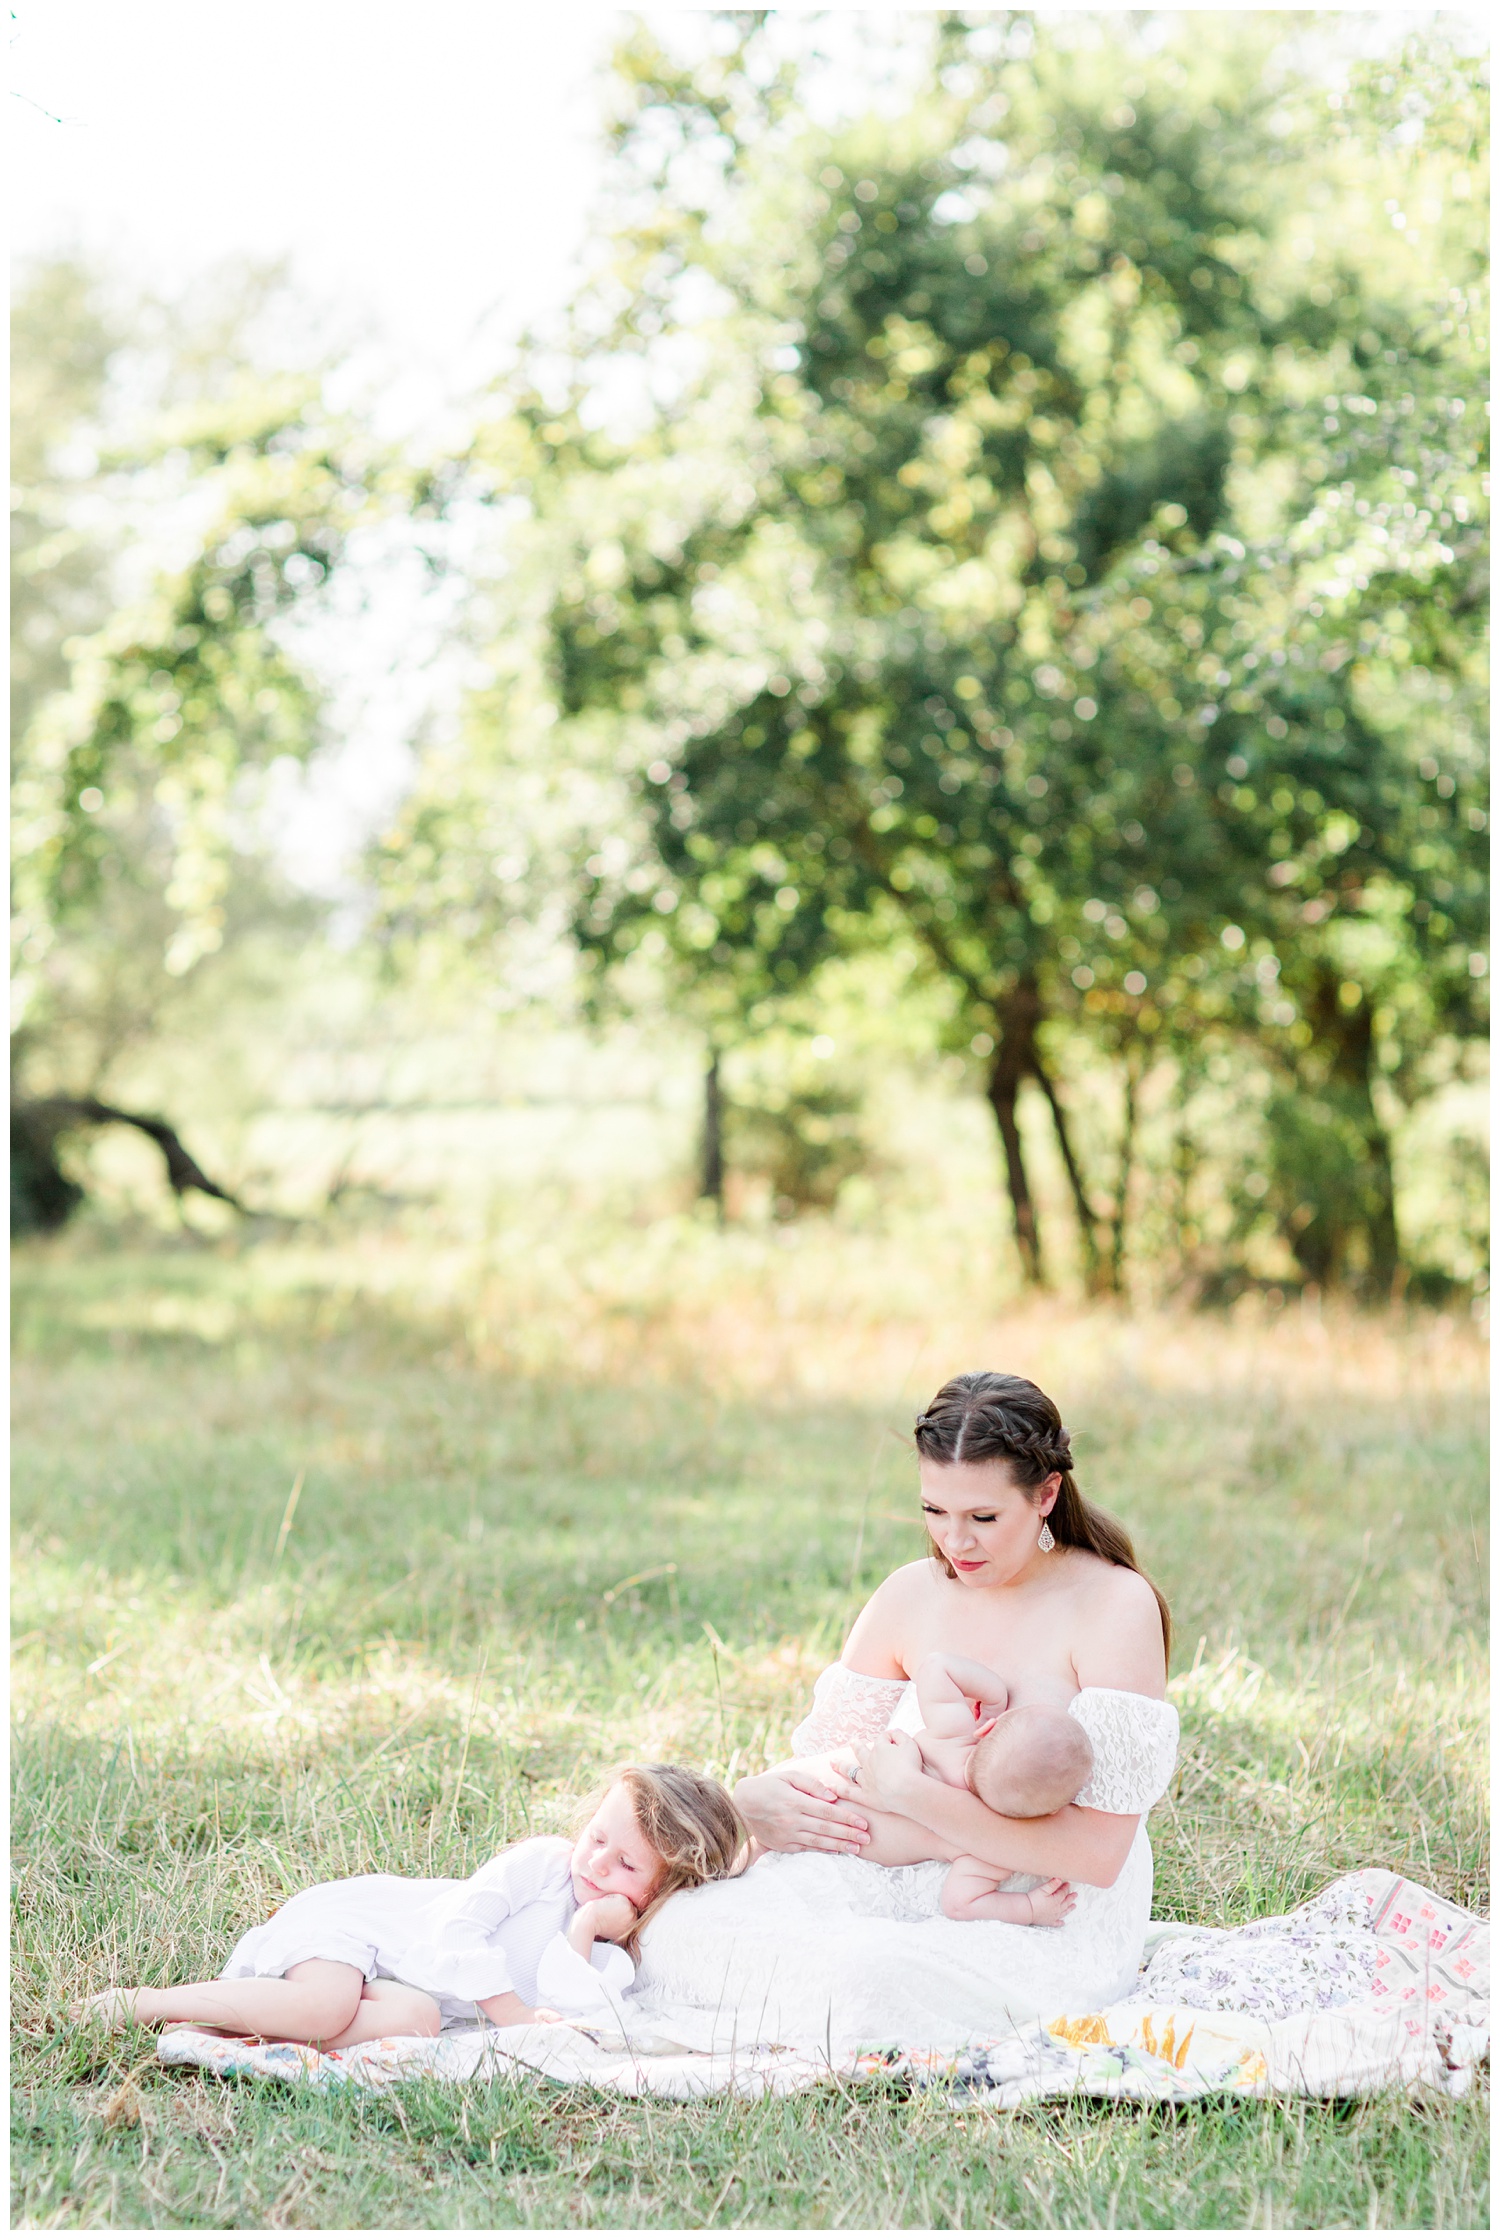 Beautiful mama wearing a white lacy dress sits in a glowy, grassy field breastfeeding her baby boy while her toddler girl rest upon her legs | CB Studio